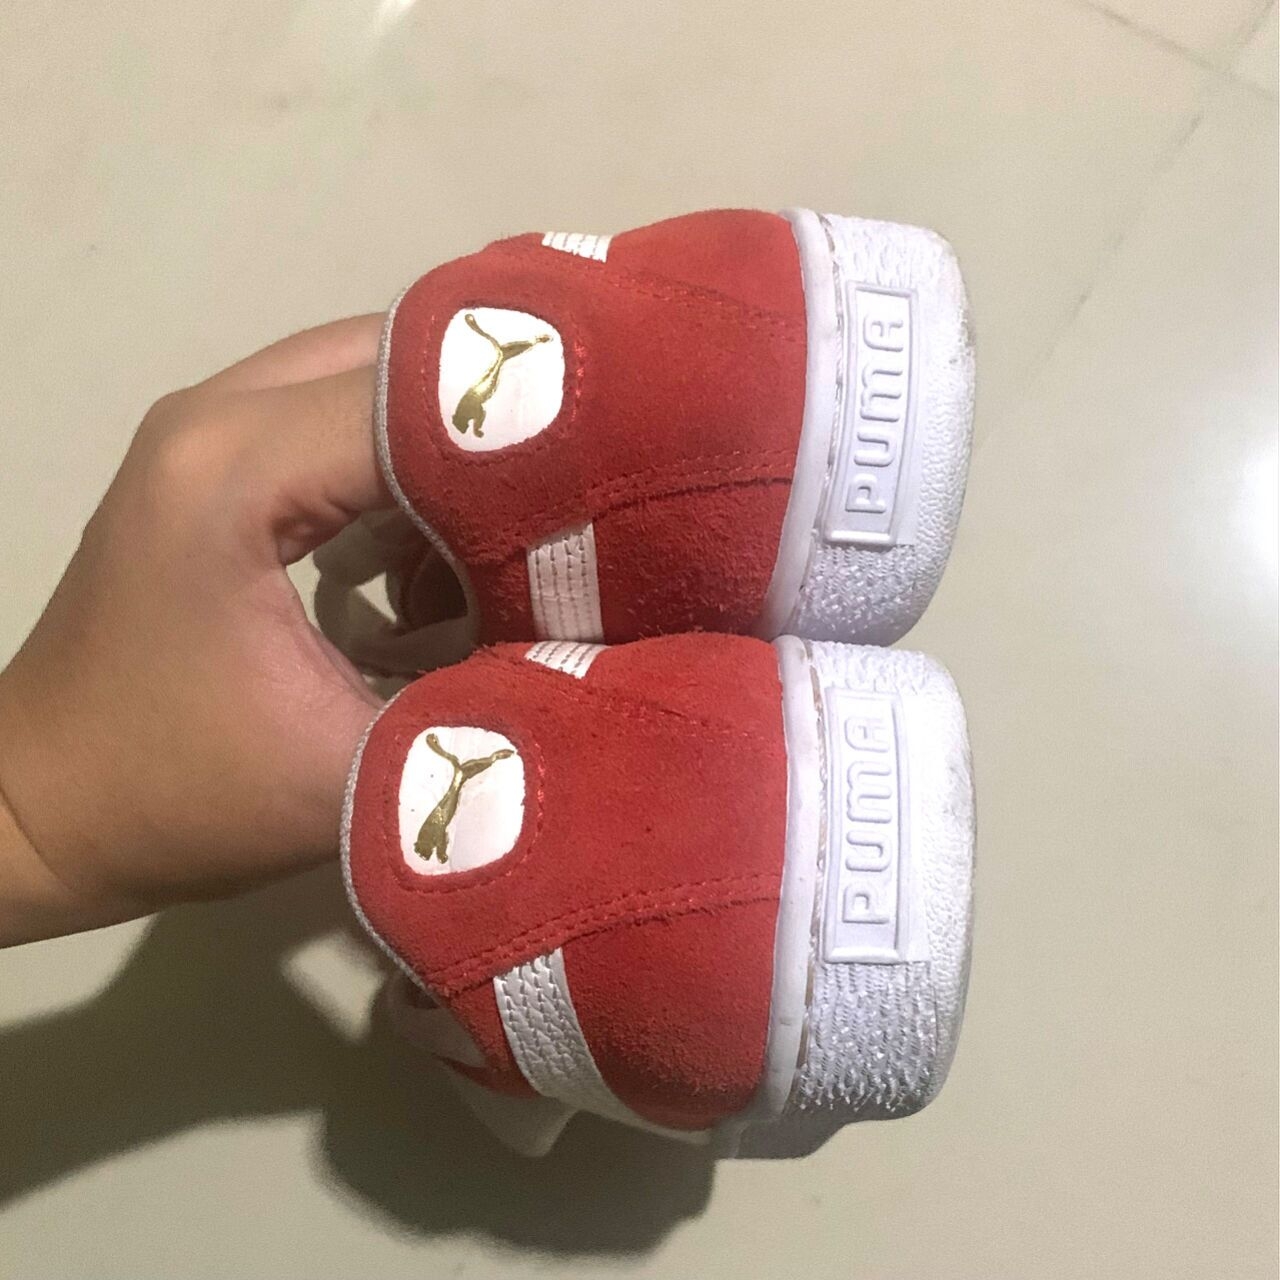 Puma Suede Bboy Fabulous Red Sneakers